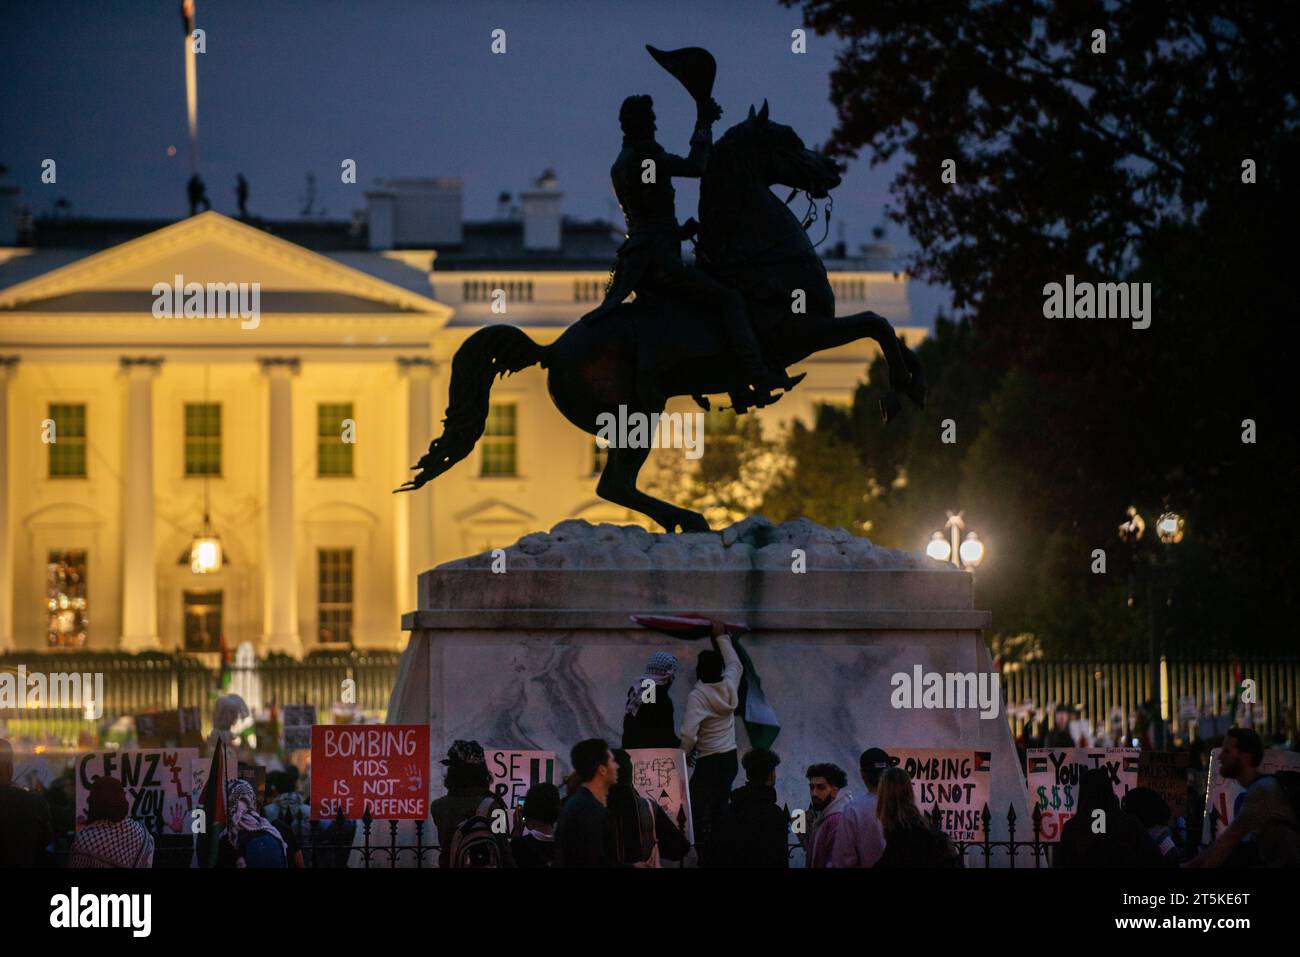 Pro-Palestinian demonstration promoting Cease Fire between Israel and Palestine at the White House. Washington D.C. USA. November 4, 2023 Stock Photo